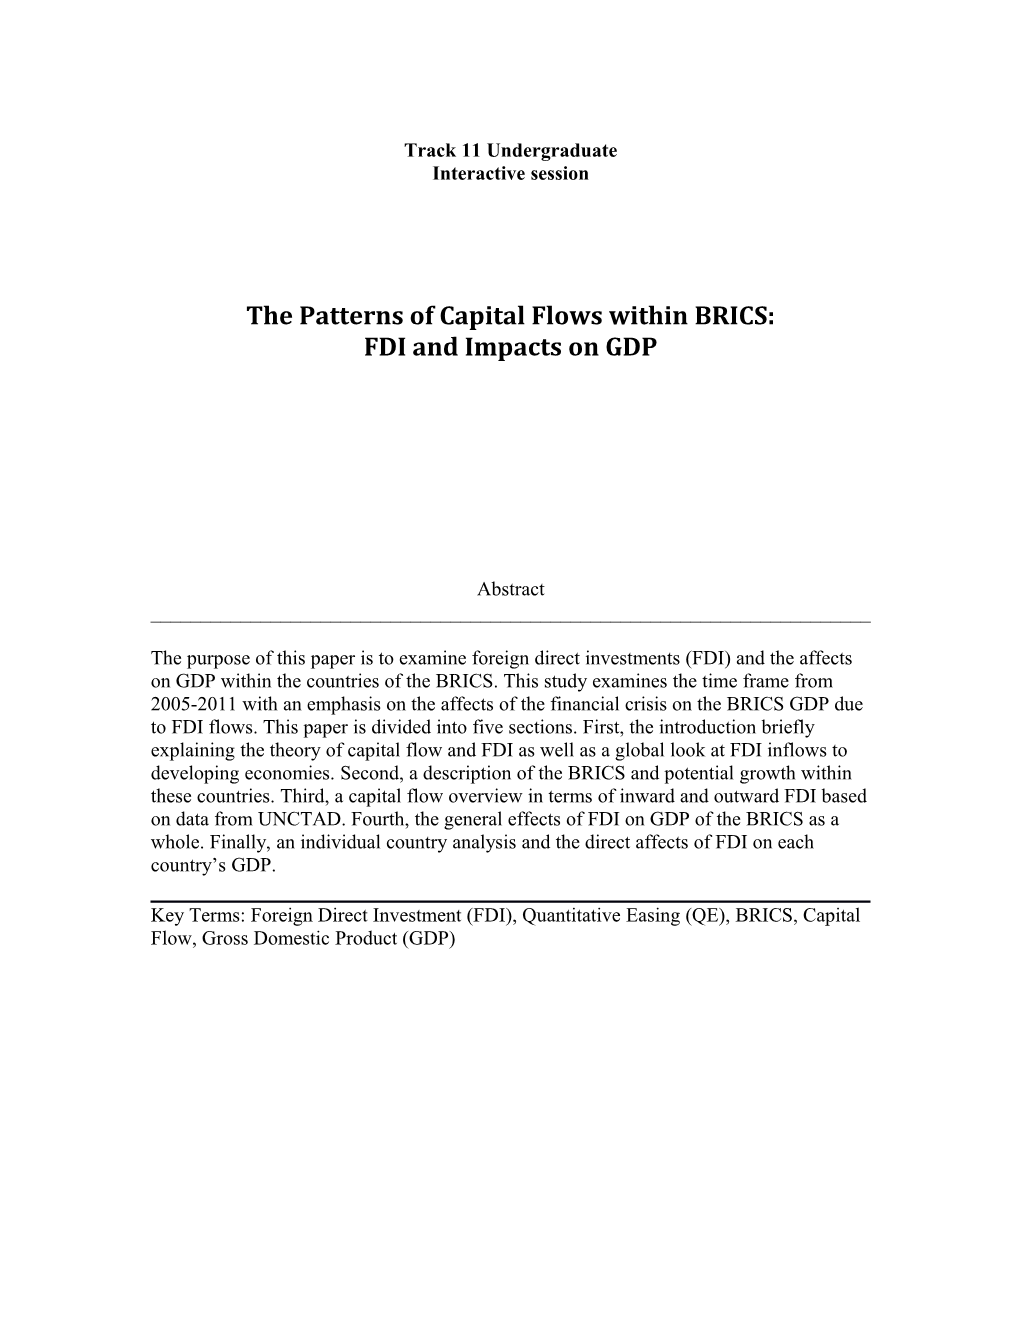 The Patterns of Capital Flows Within BRICS